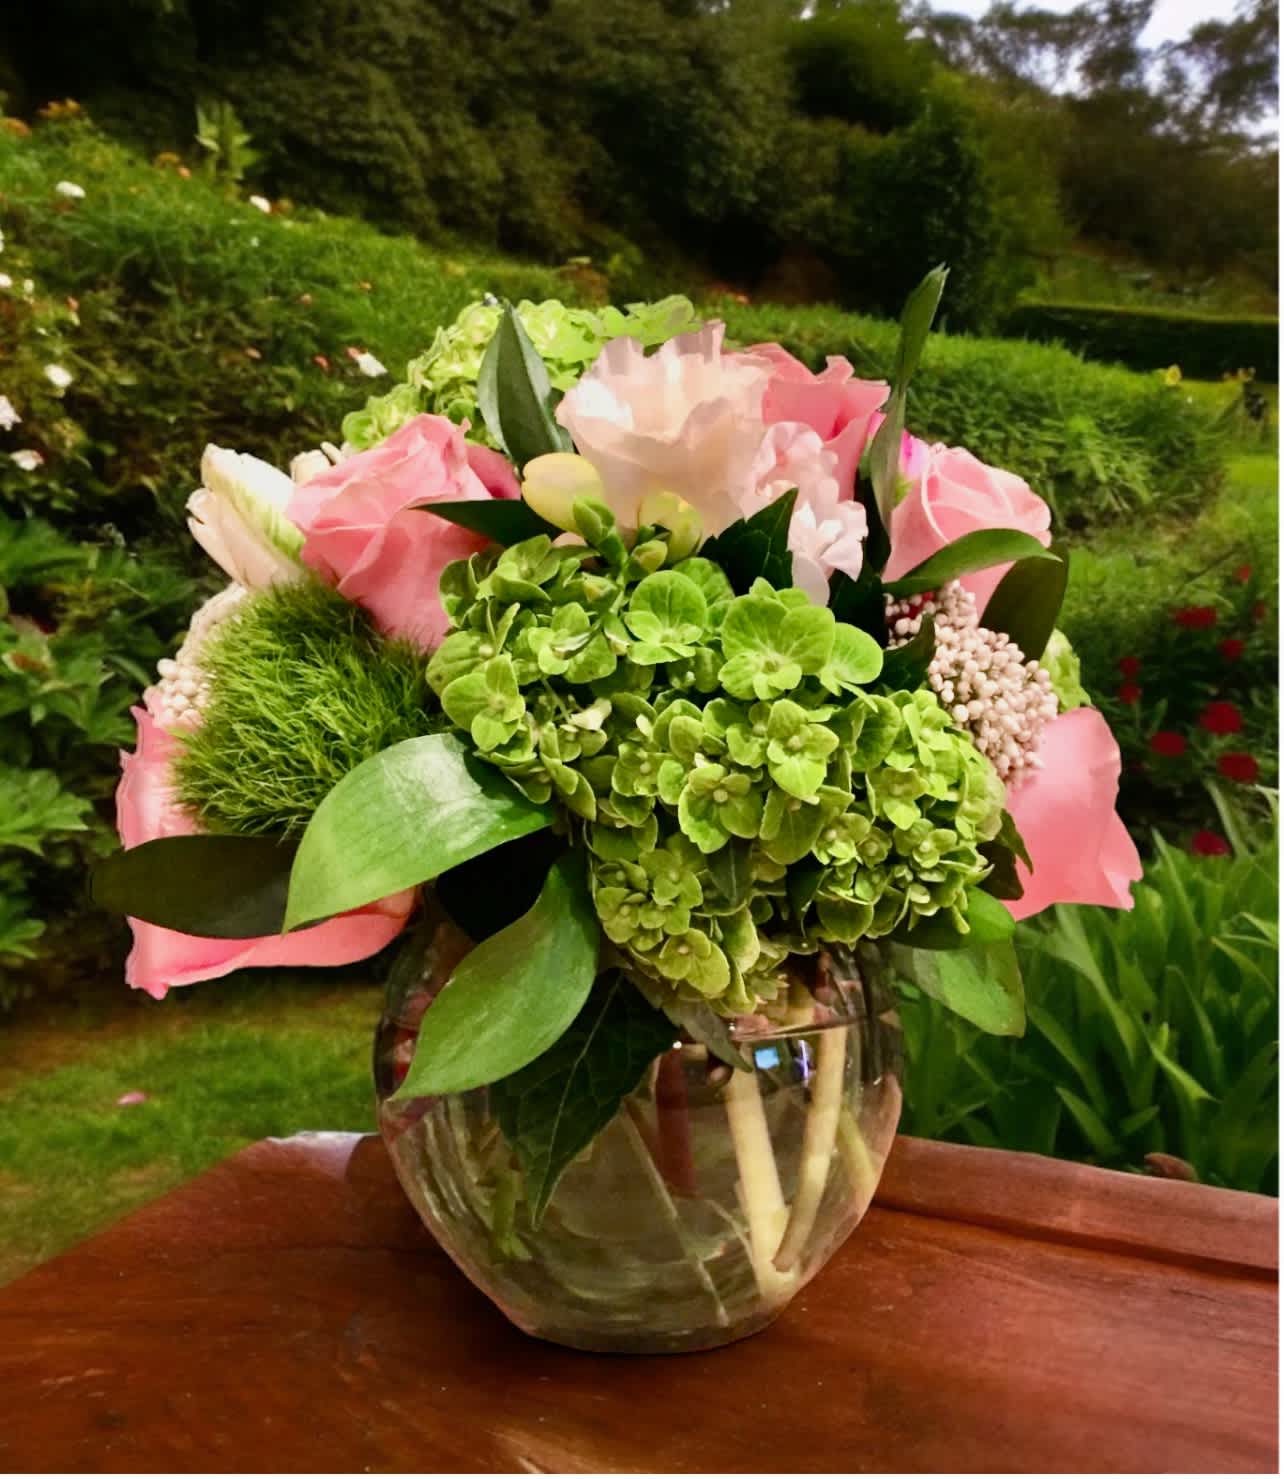 Pop of Pink - This bubble vase is back with shamrock hydrangea, pink roses, green and white parrot tulips and white rice flower and a touch of greens.  A nice pop of pink for any gift! Tax free. Same day hand delivery.